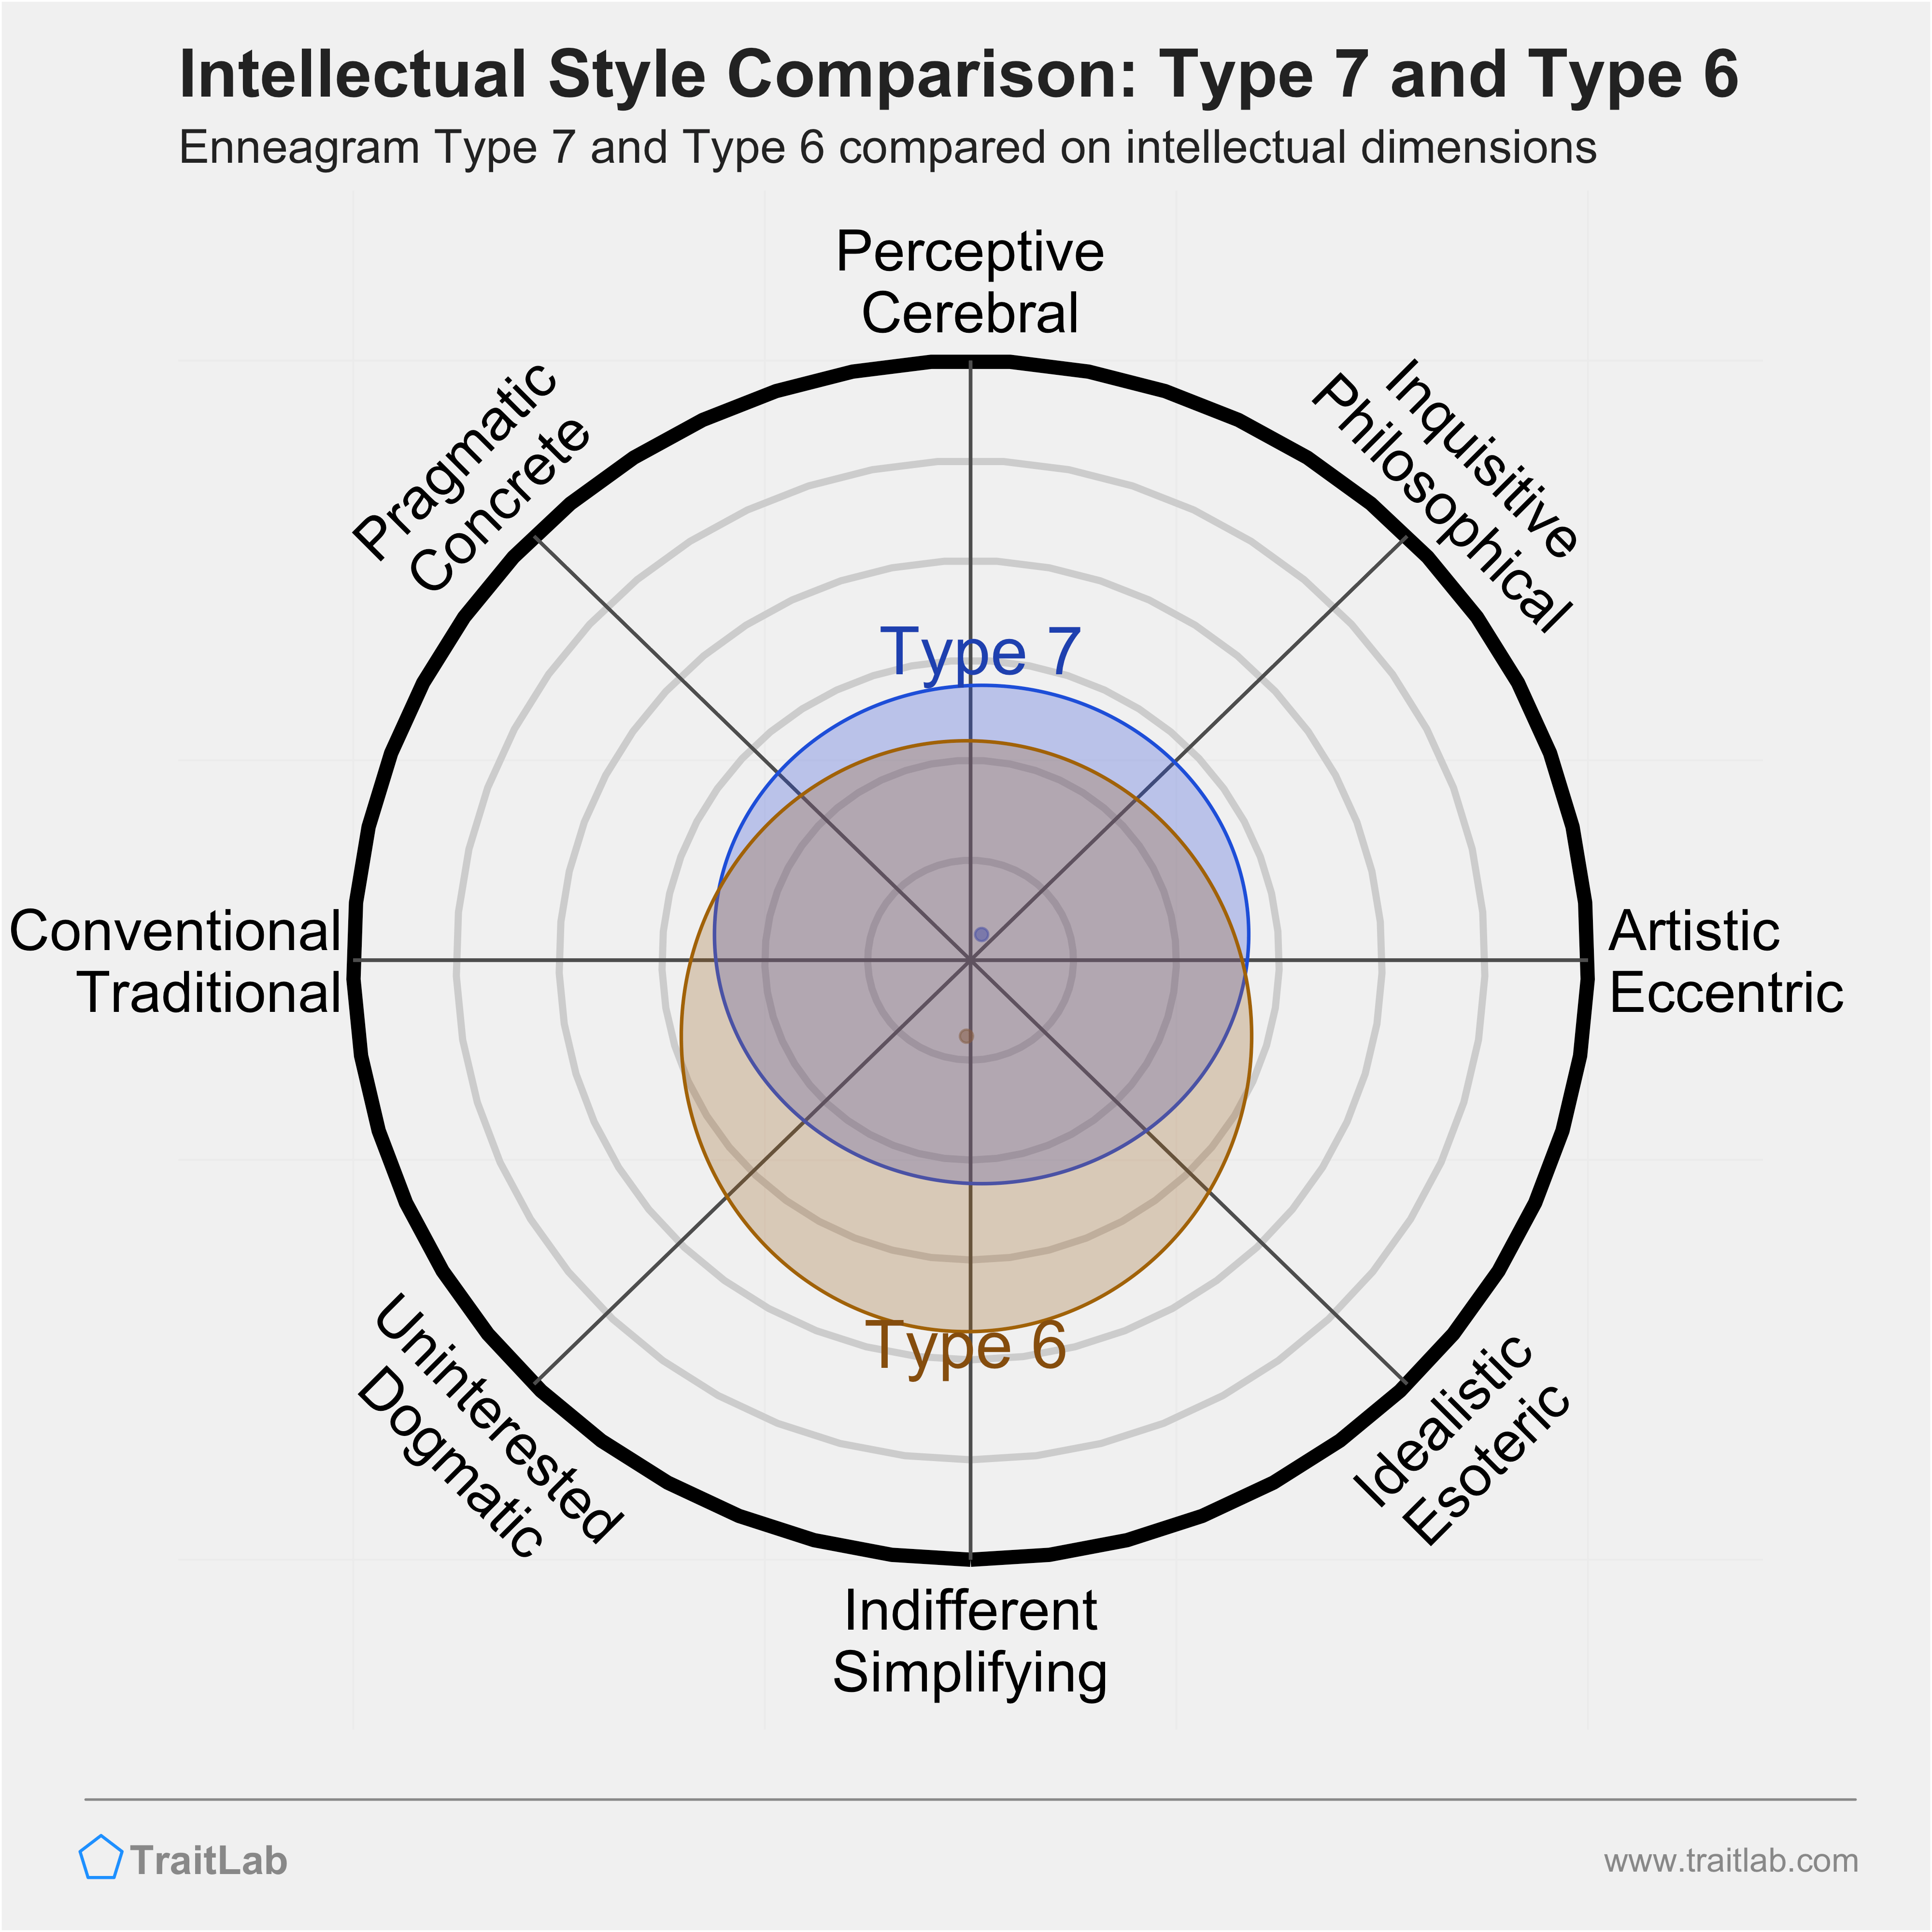 Type 7 and Type 6 comparison across intellectual dimensions